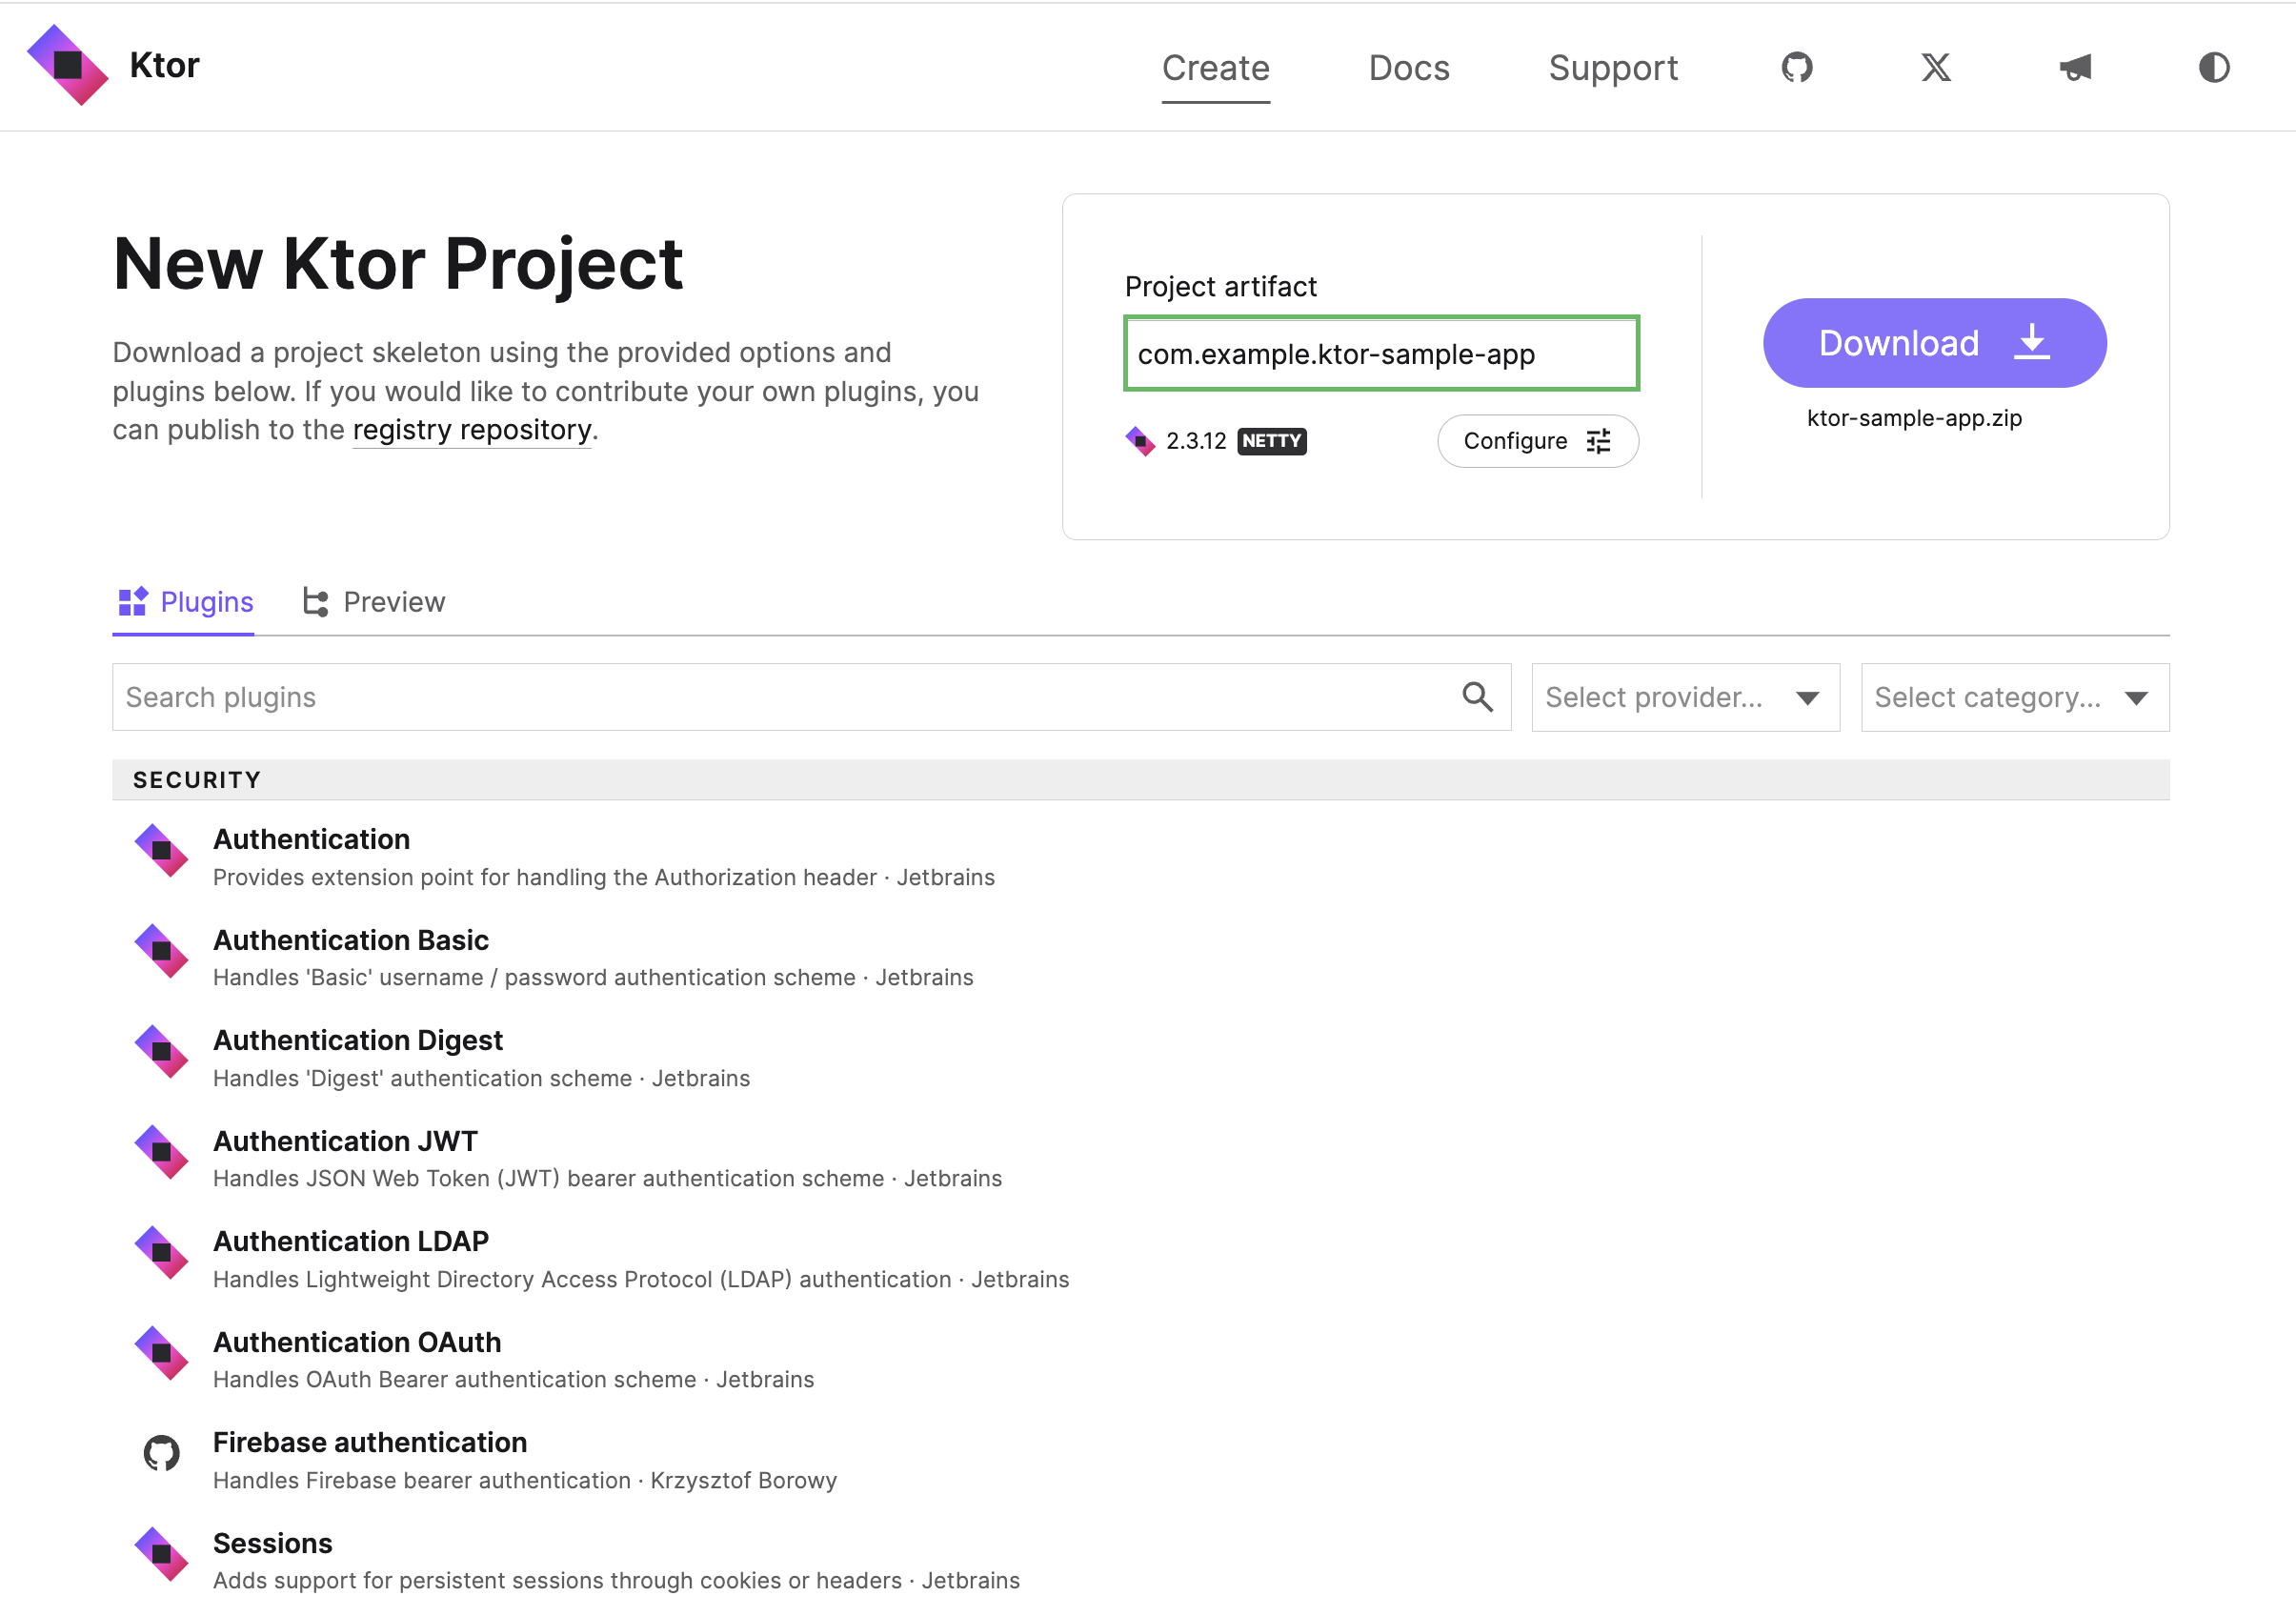 Ktor Project Generator with Project Artifact Name org.example.ktor-sample-app